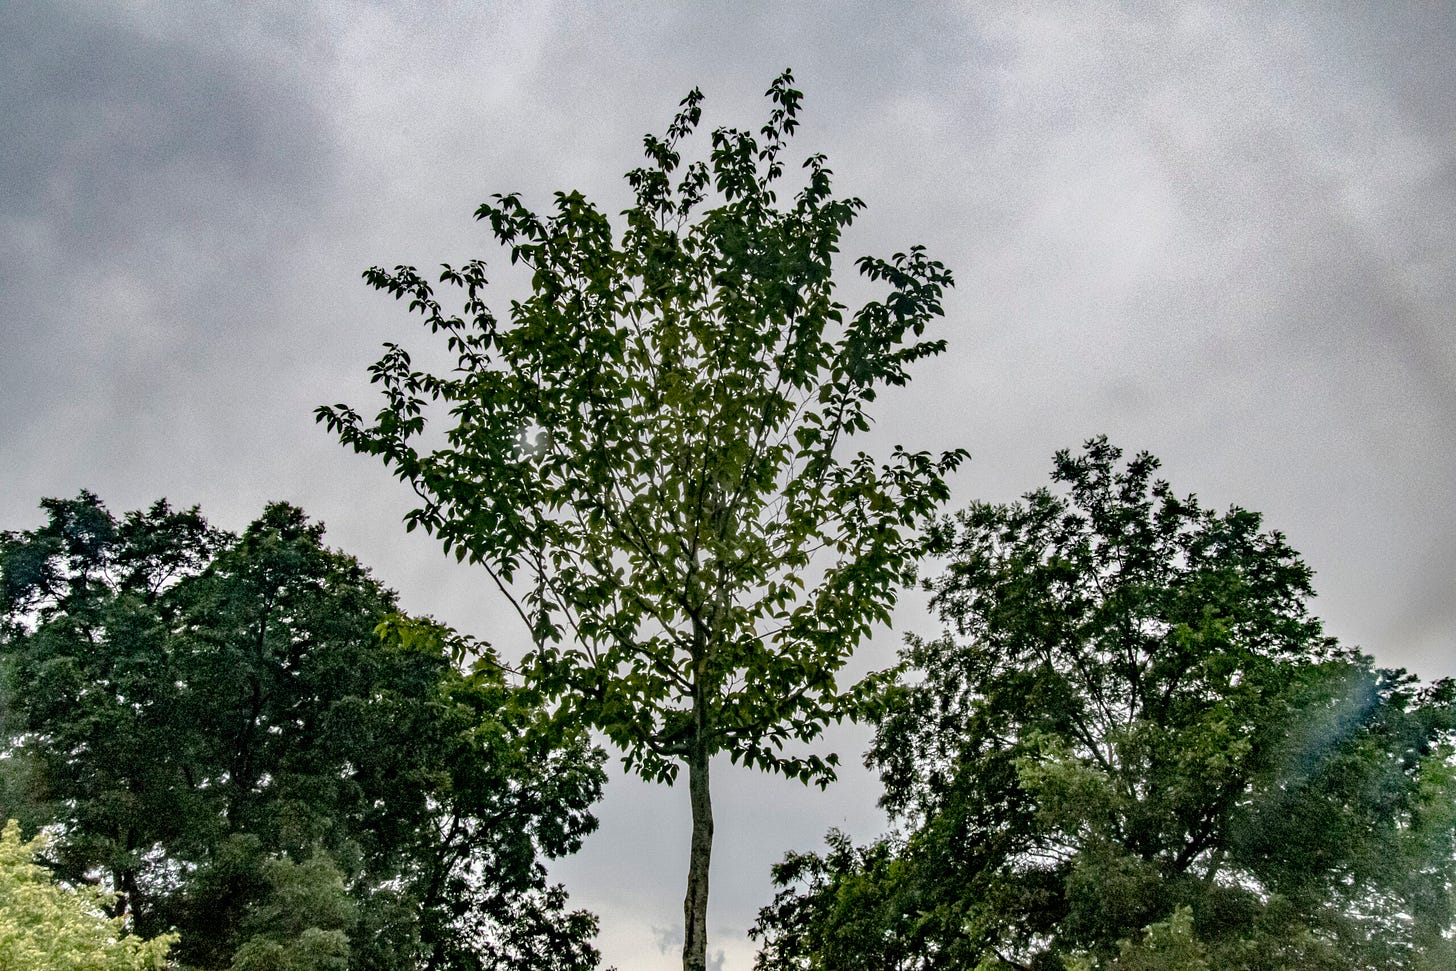 A tree grows in Birmingham, one of dozens planted in the East Thomas neighborhood before the World Games in 2022. Credit: Lee Hedgepeth/Inside Climate News.